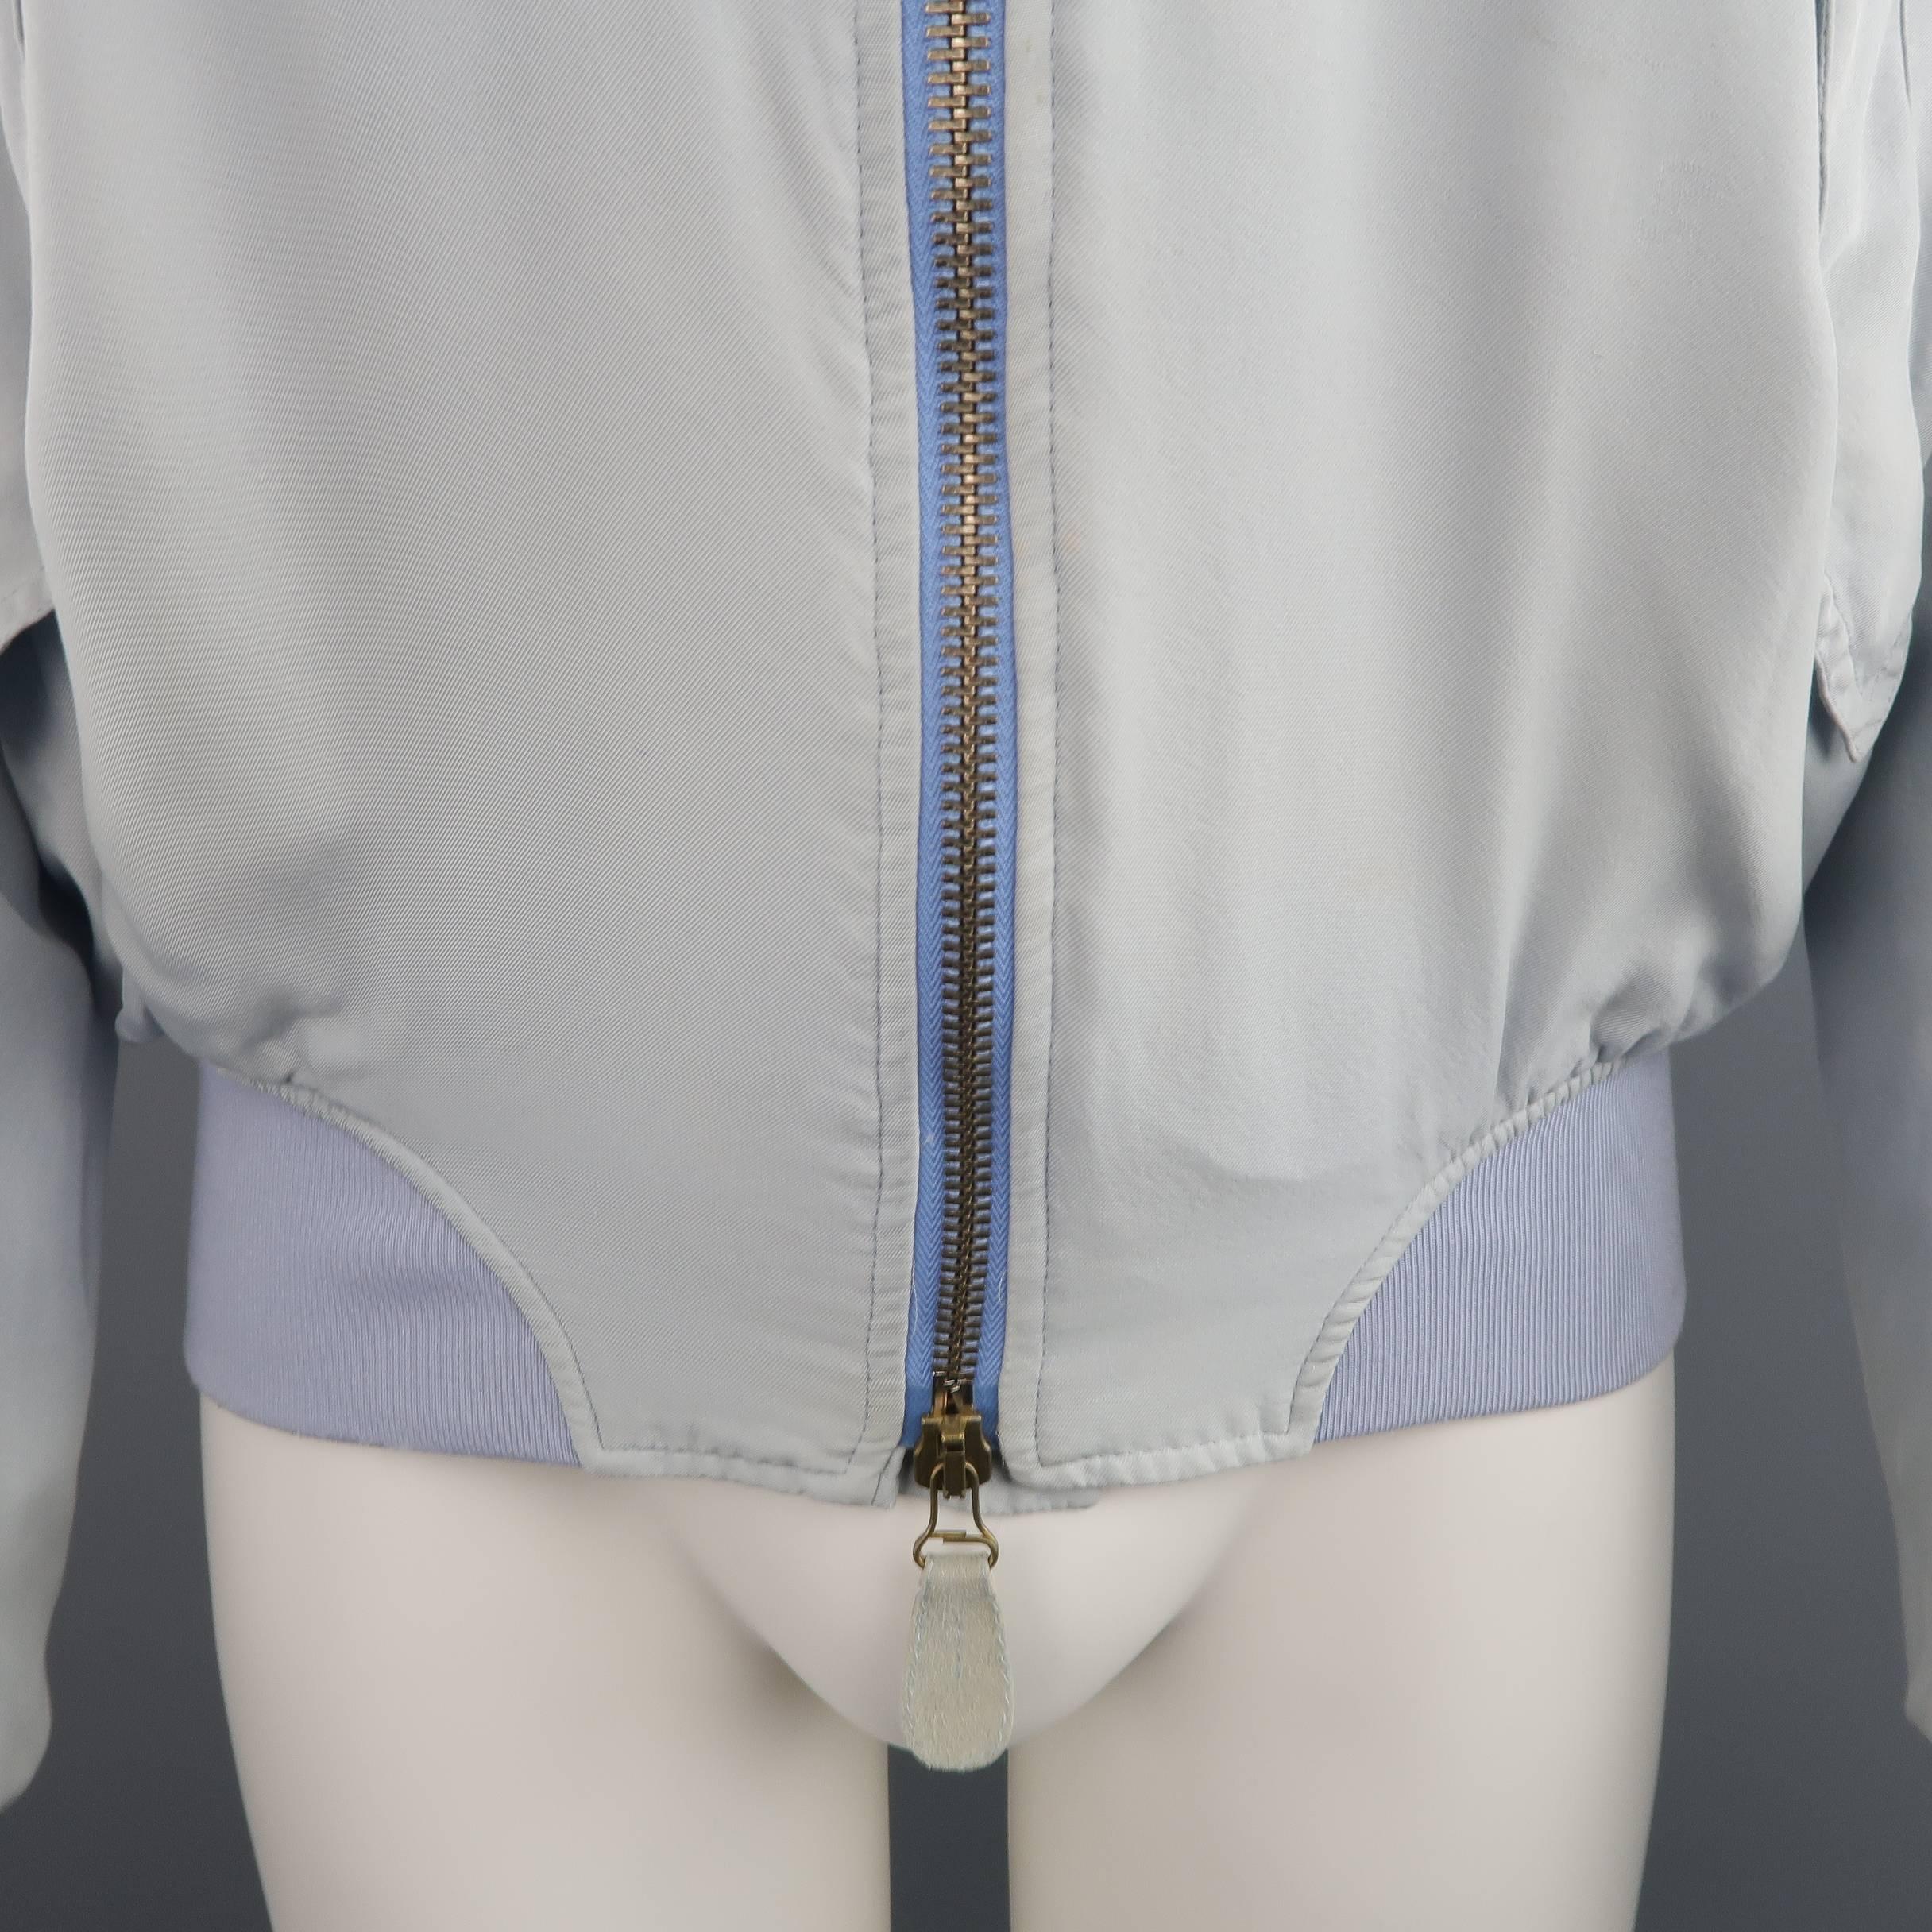 Vintage GAULTIER2 by JEAN PAUL GAULTIER MA-1 style bomber jacket comes in light weight powder blue silk twill and features a double zip front with suede tabs, slanted snap flap pockets, and ribbed knit cuffs, waistband, and baseball collar. Minor